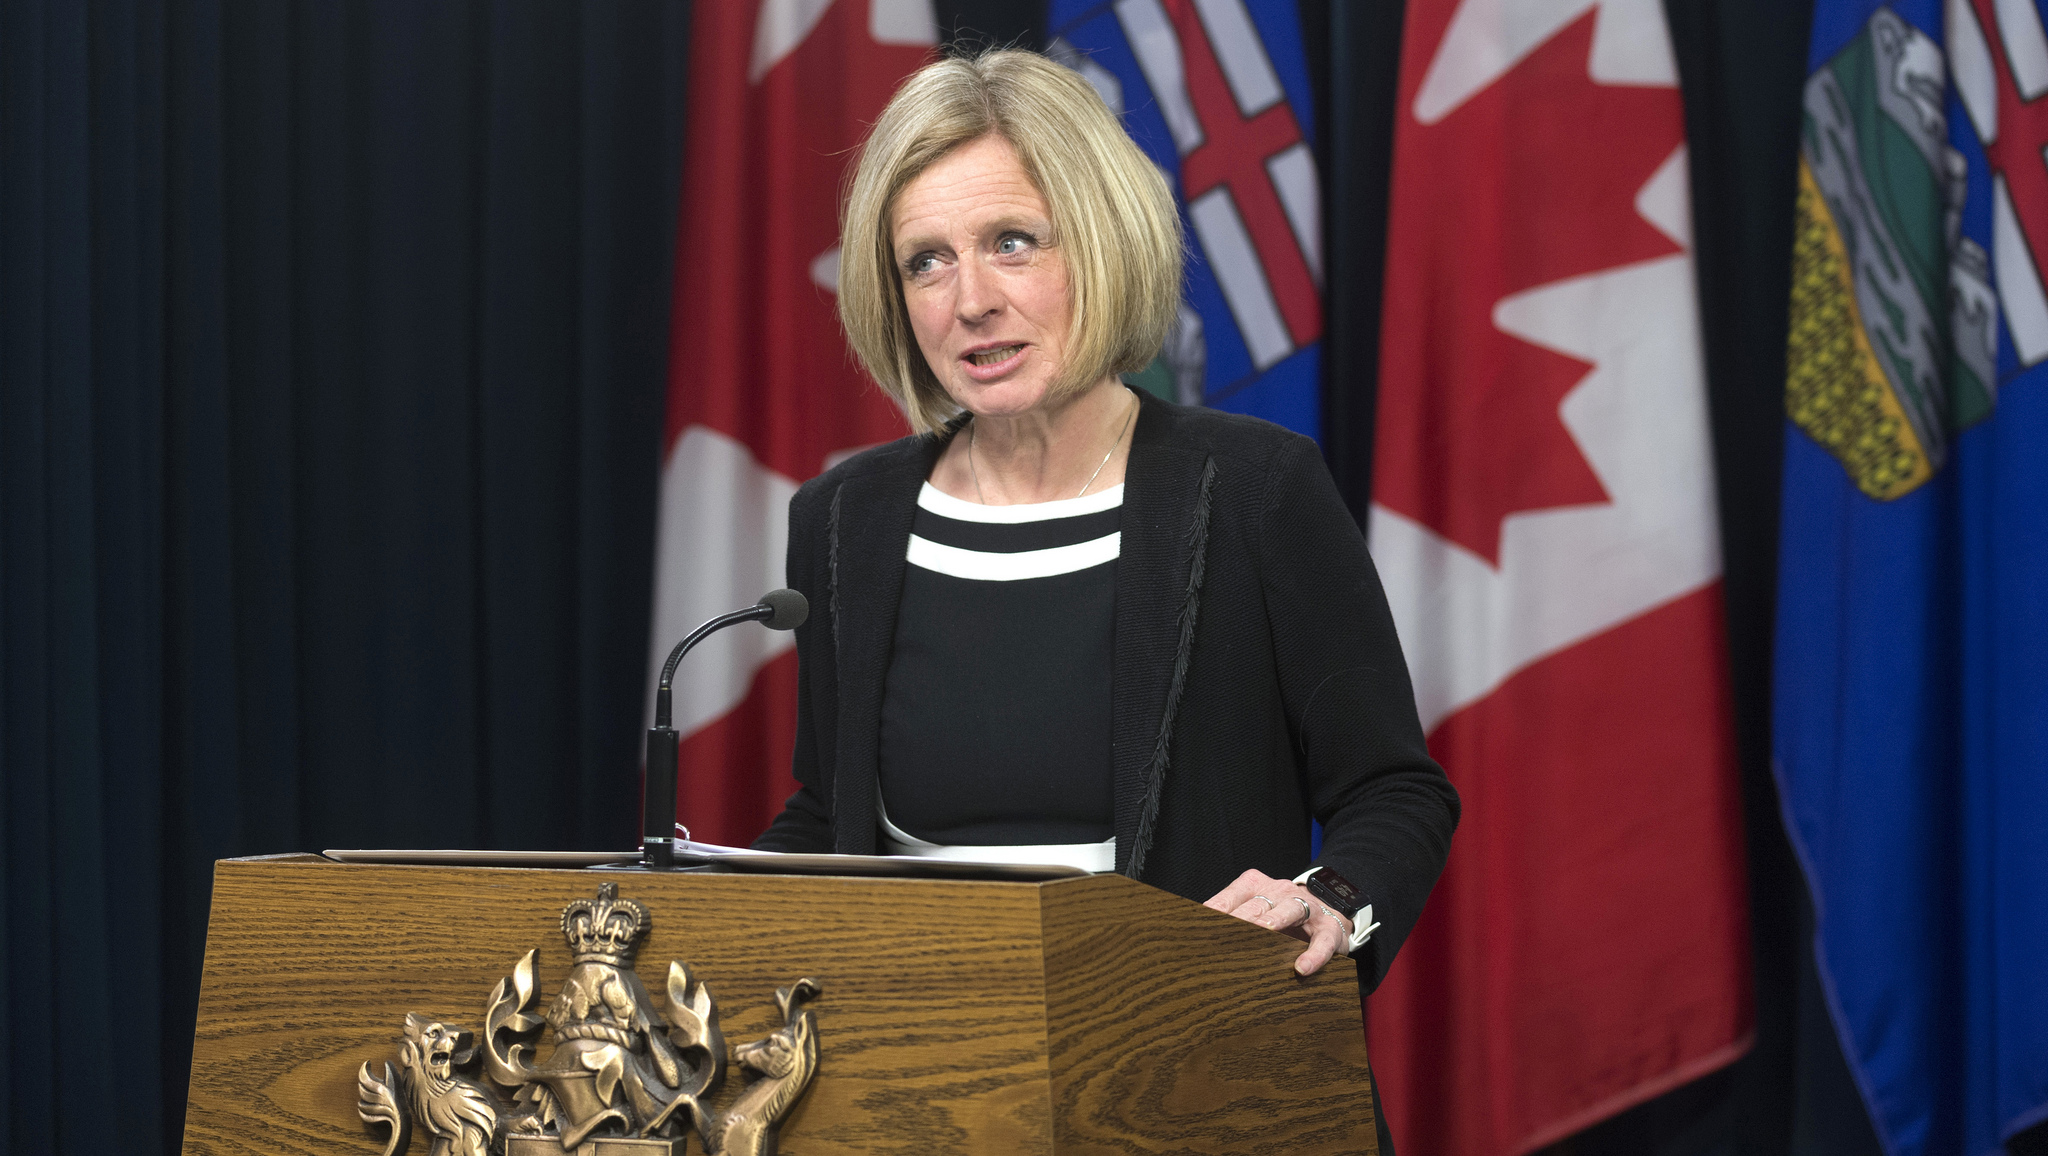 Trans Mountain Pipeline Expansion: Premier Notley